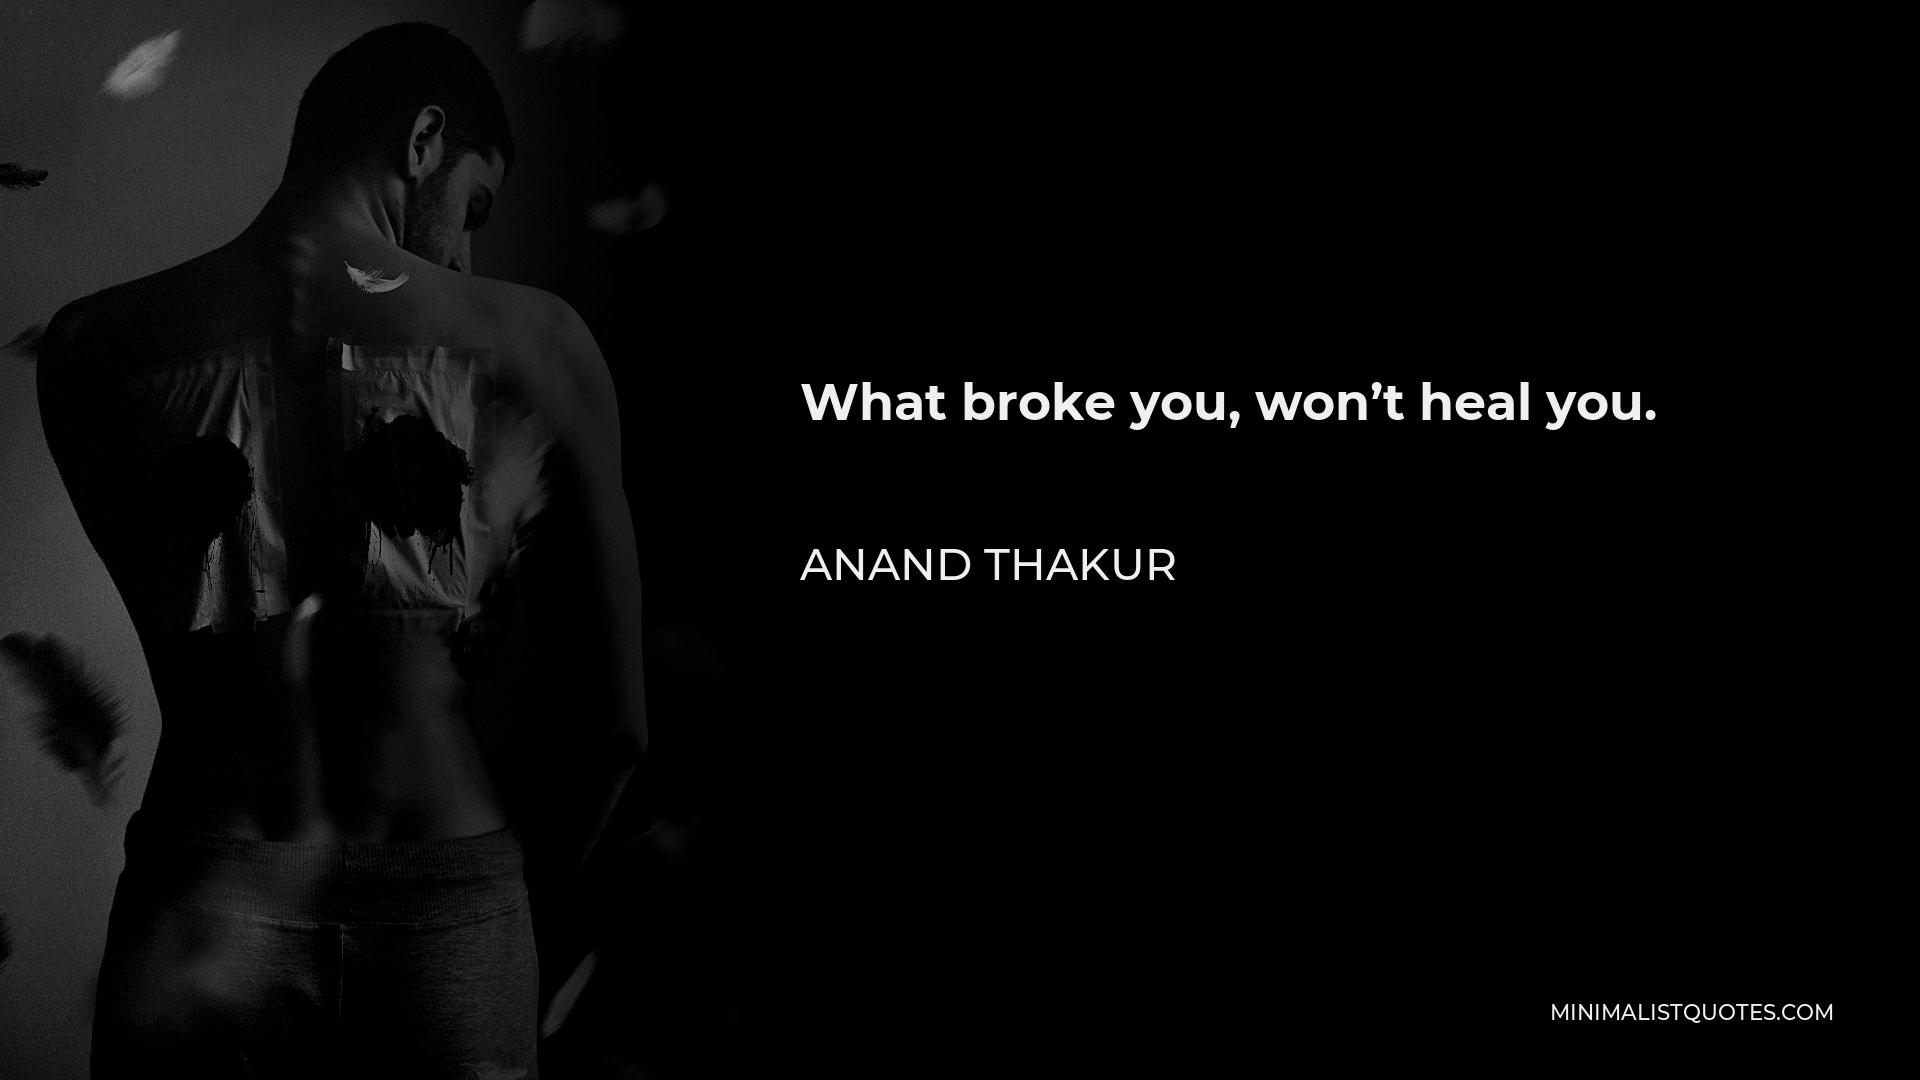 Anand Thakur Quote - What broke you, won’t heal you.